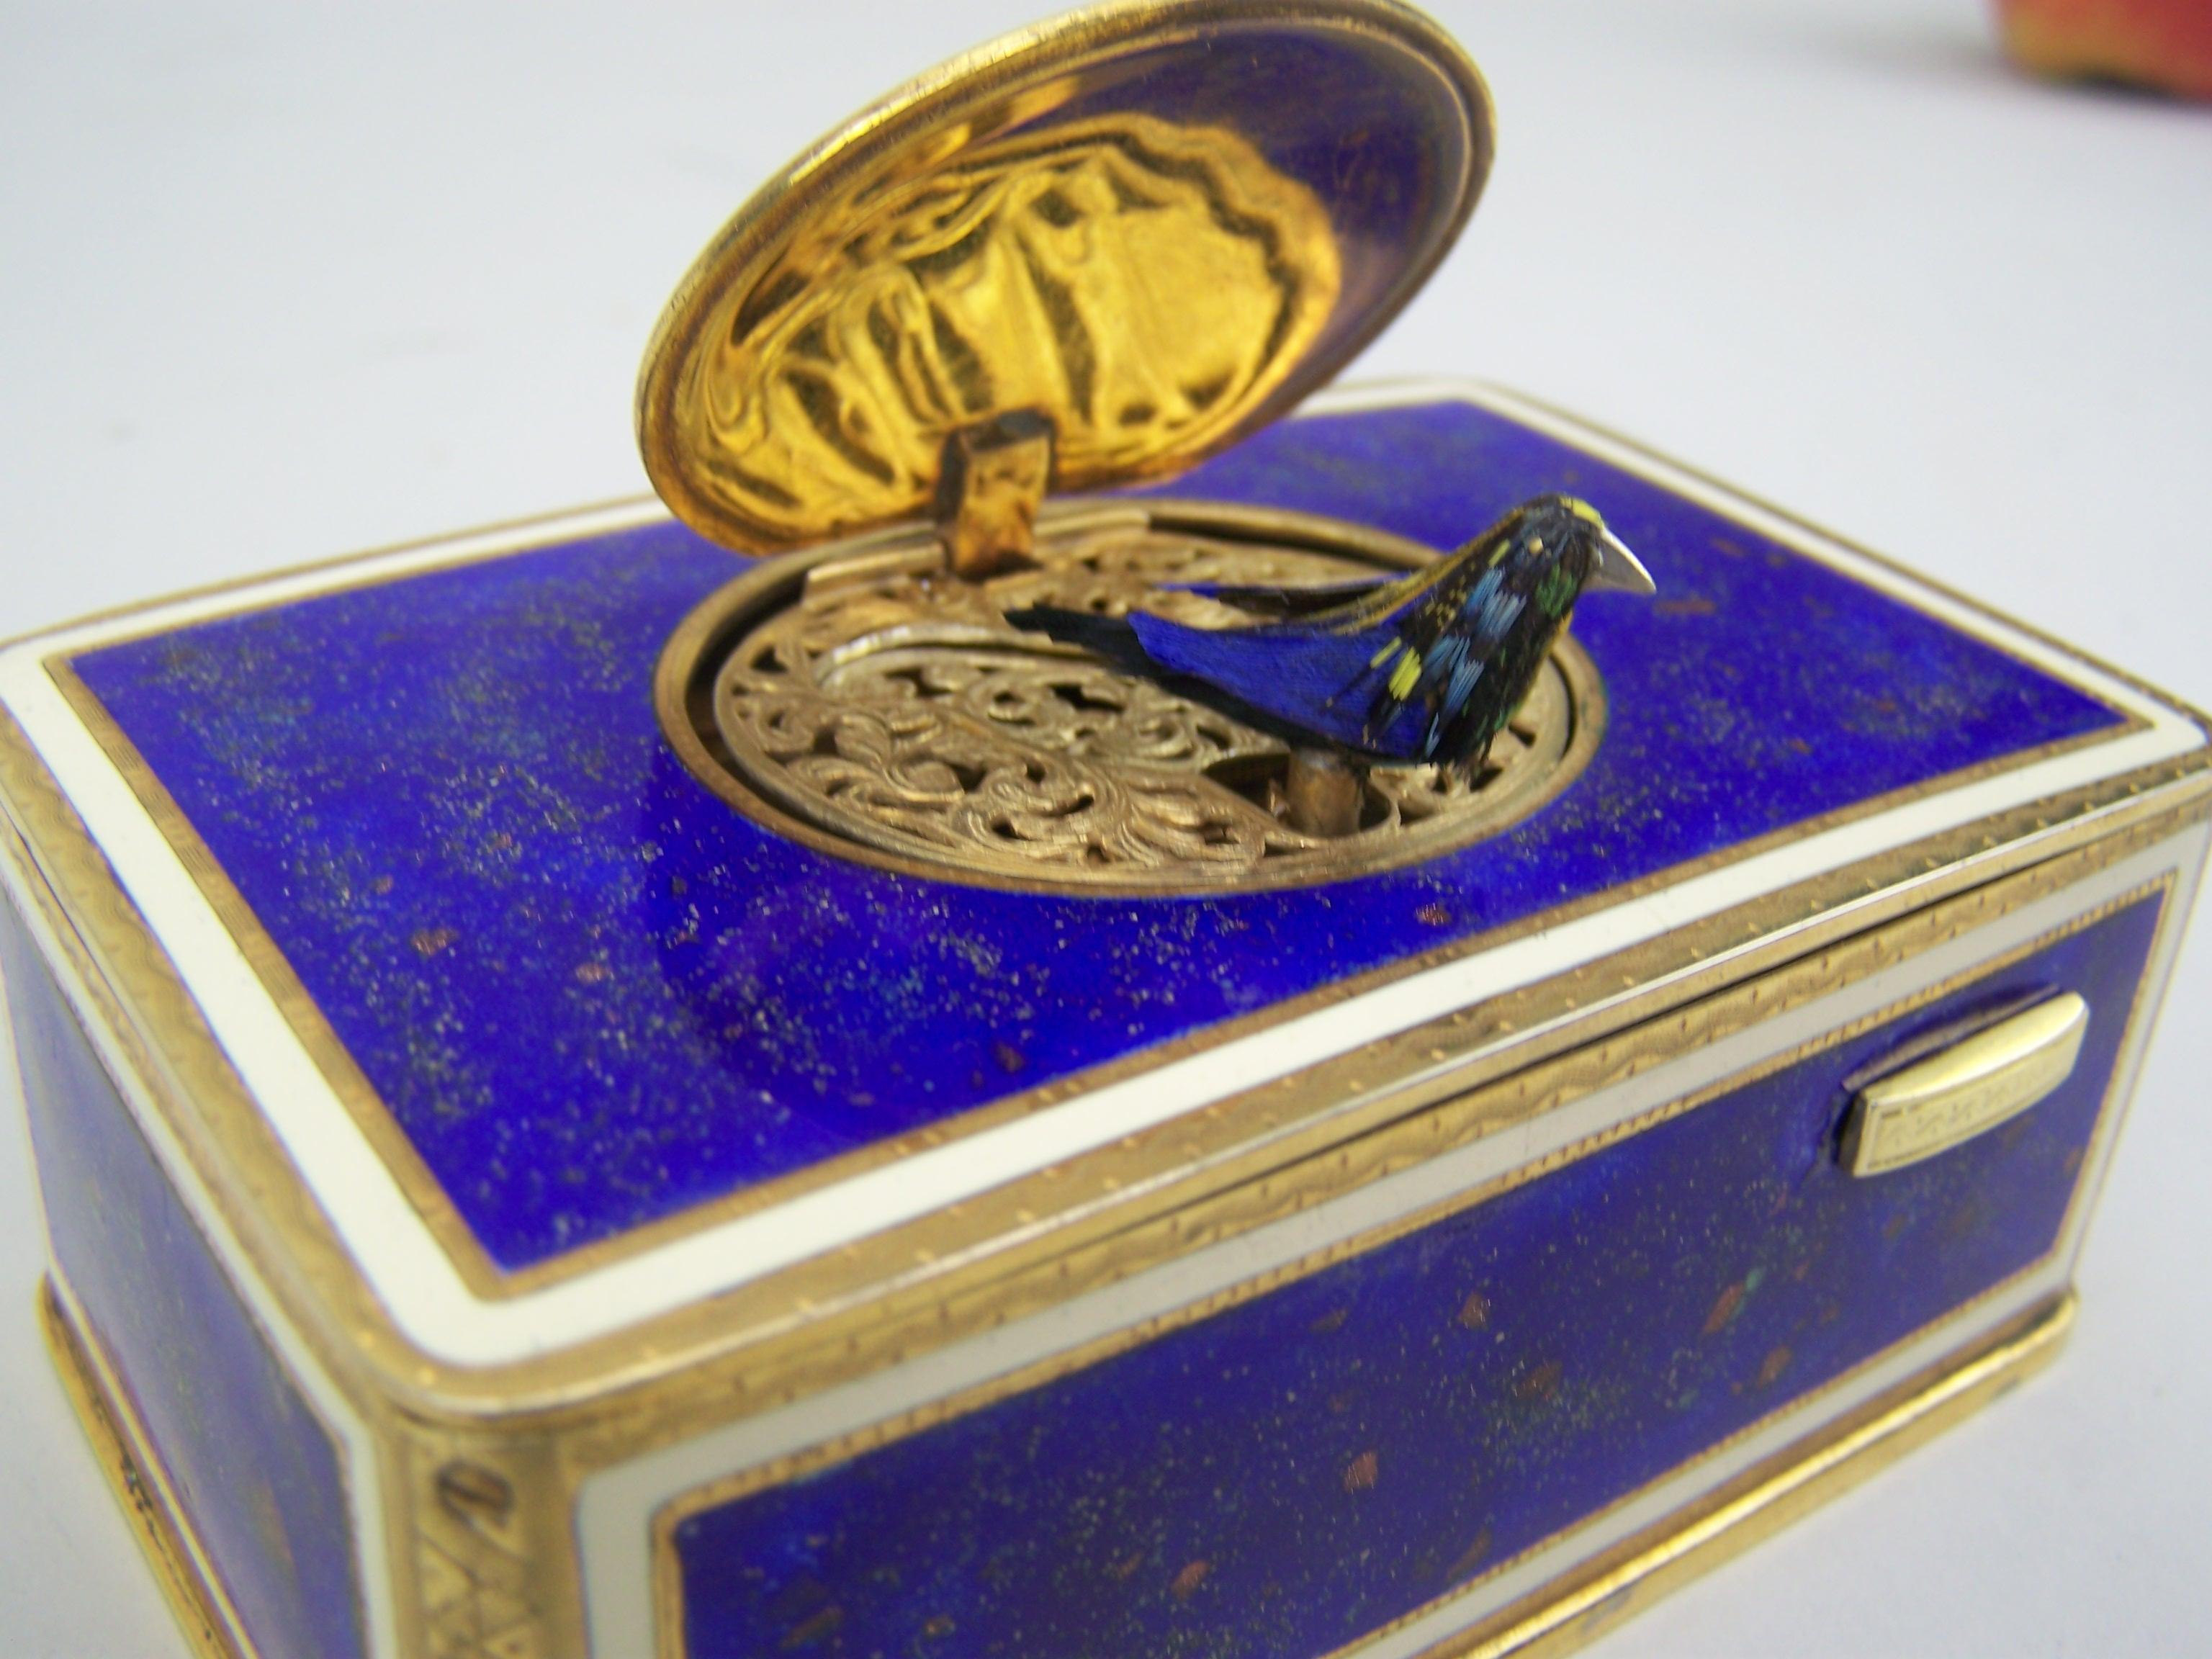 Singing bird box by K Griesbaum in guilded case and blue-goldflaked enamel 7